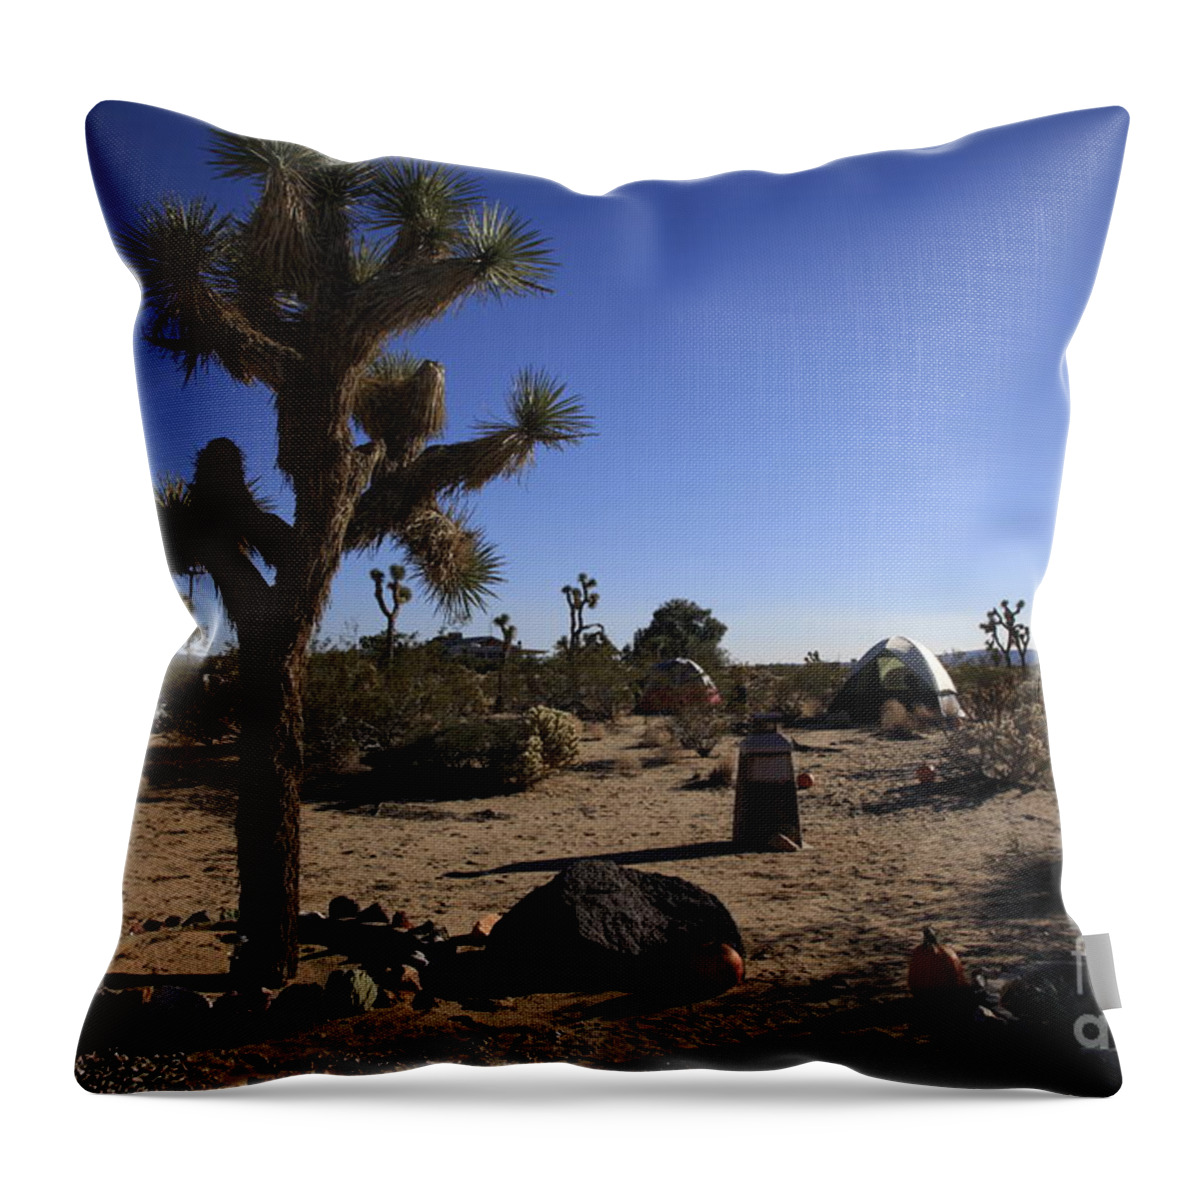 Desert Throw Pillow featuring the photograph Camping in the desert by Nina Prommer